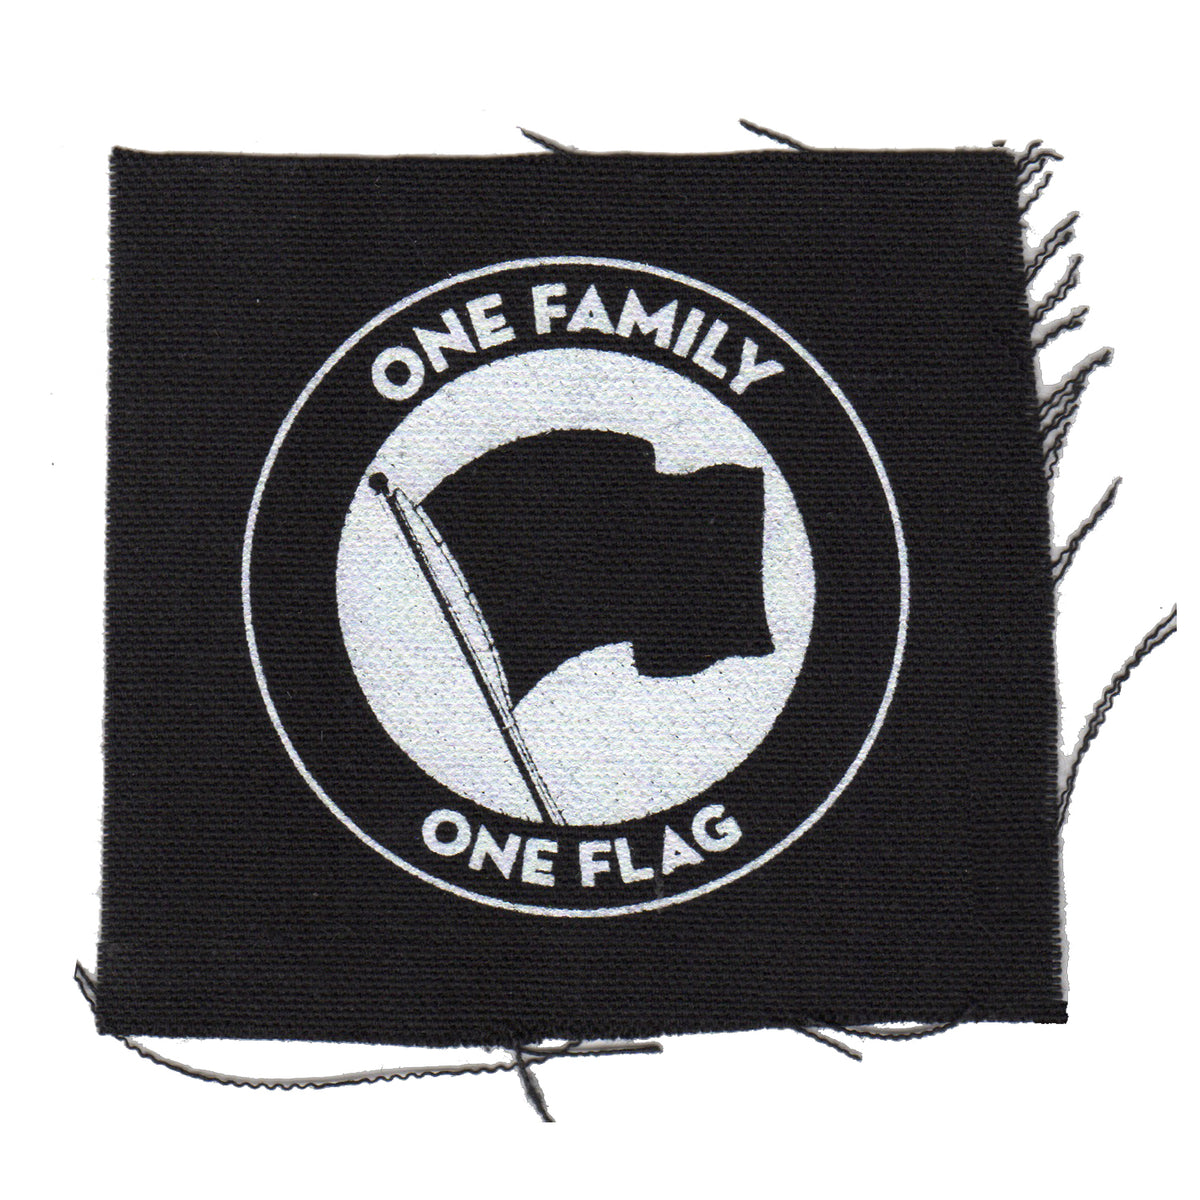 Pirates Press Records - One Family One Flag - Black - Patch - Cloth - Screenprinted - 4&quot; x 4&quot;